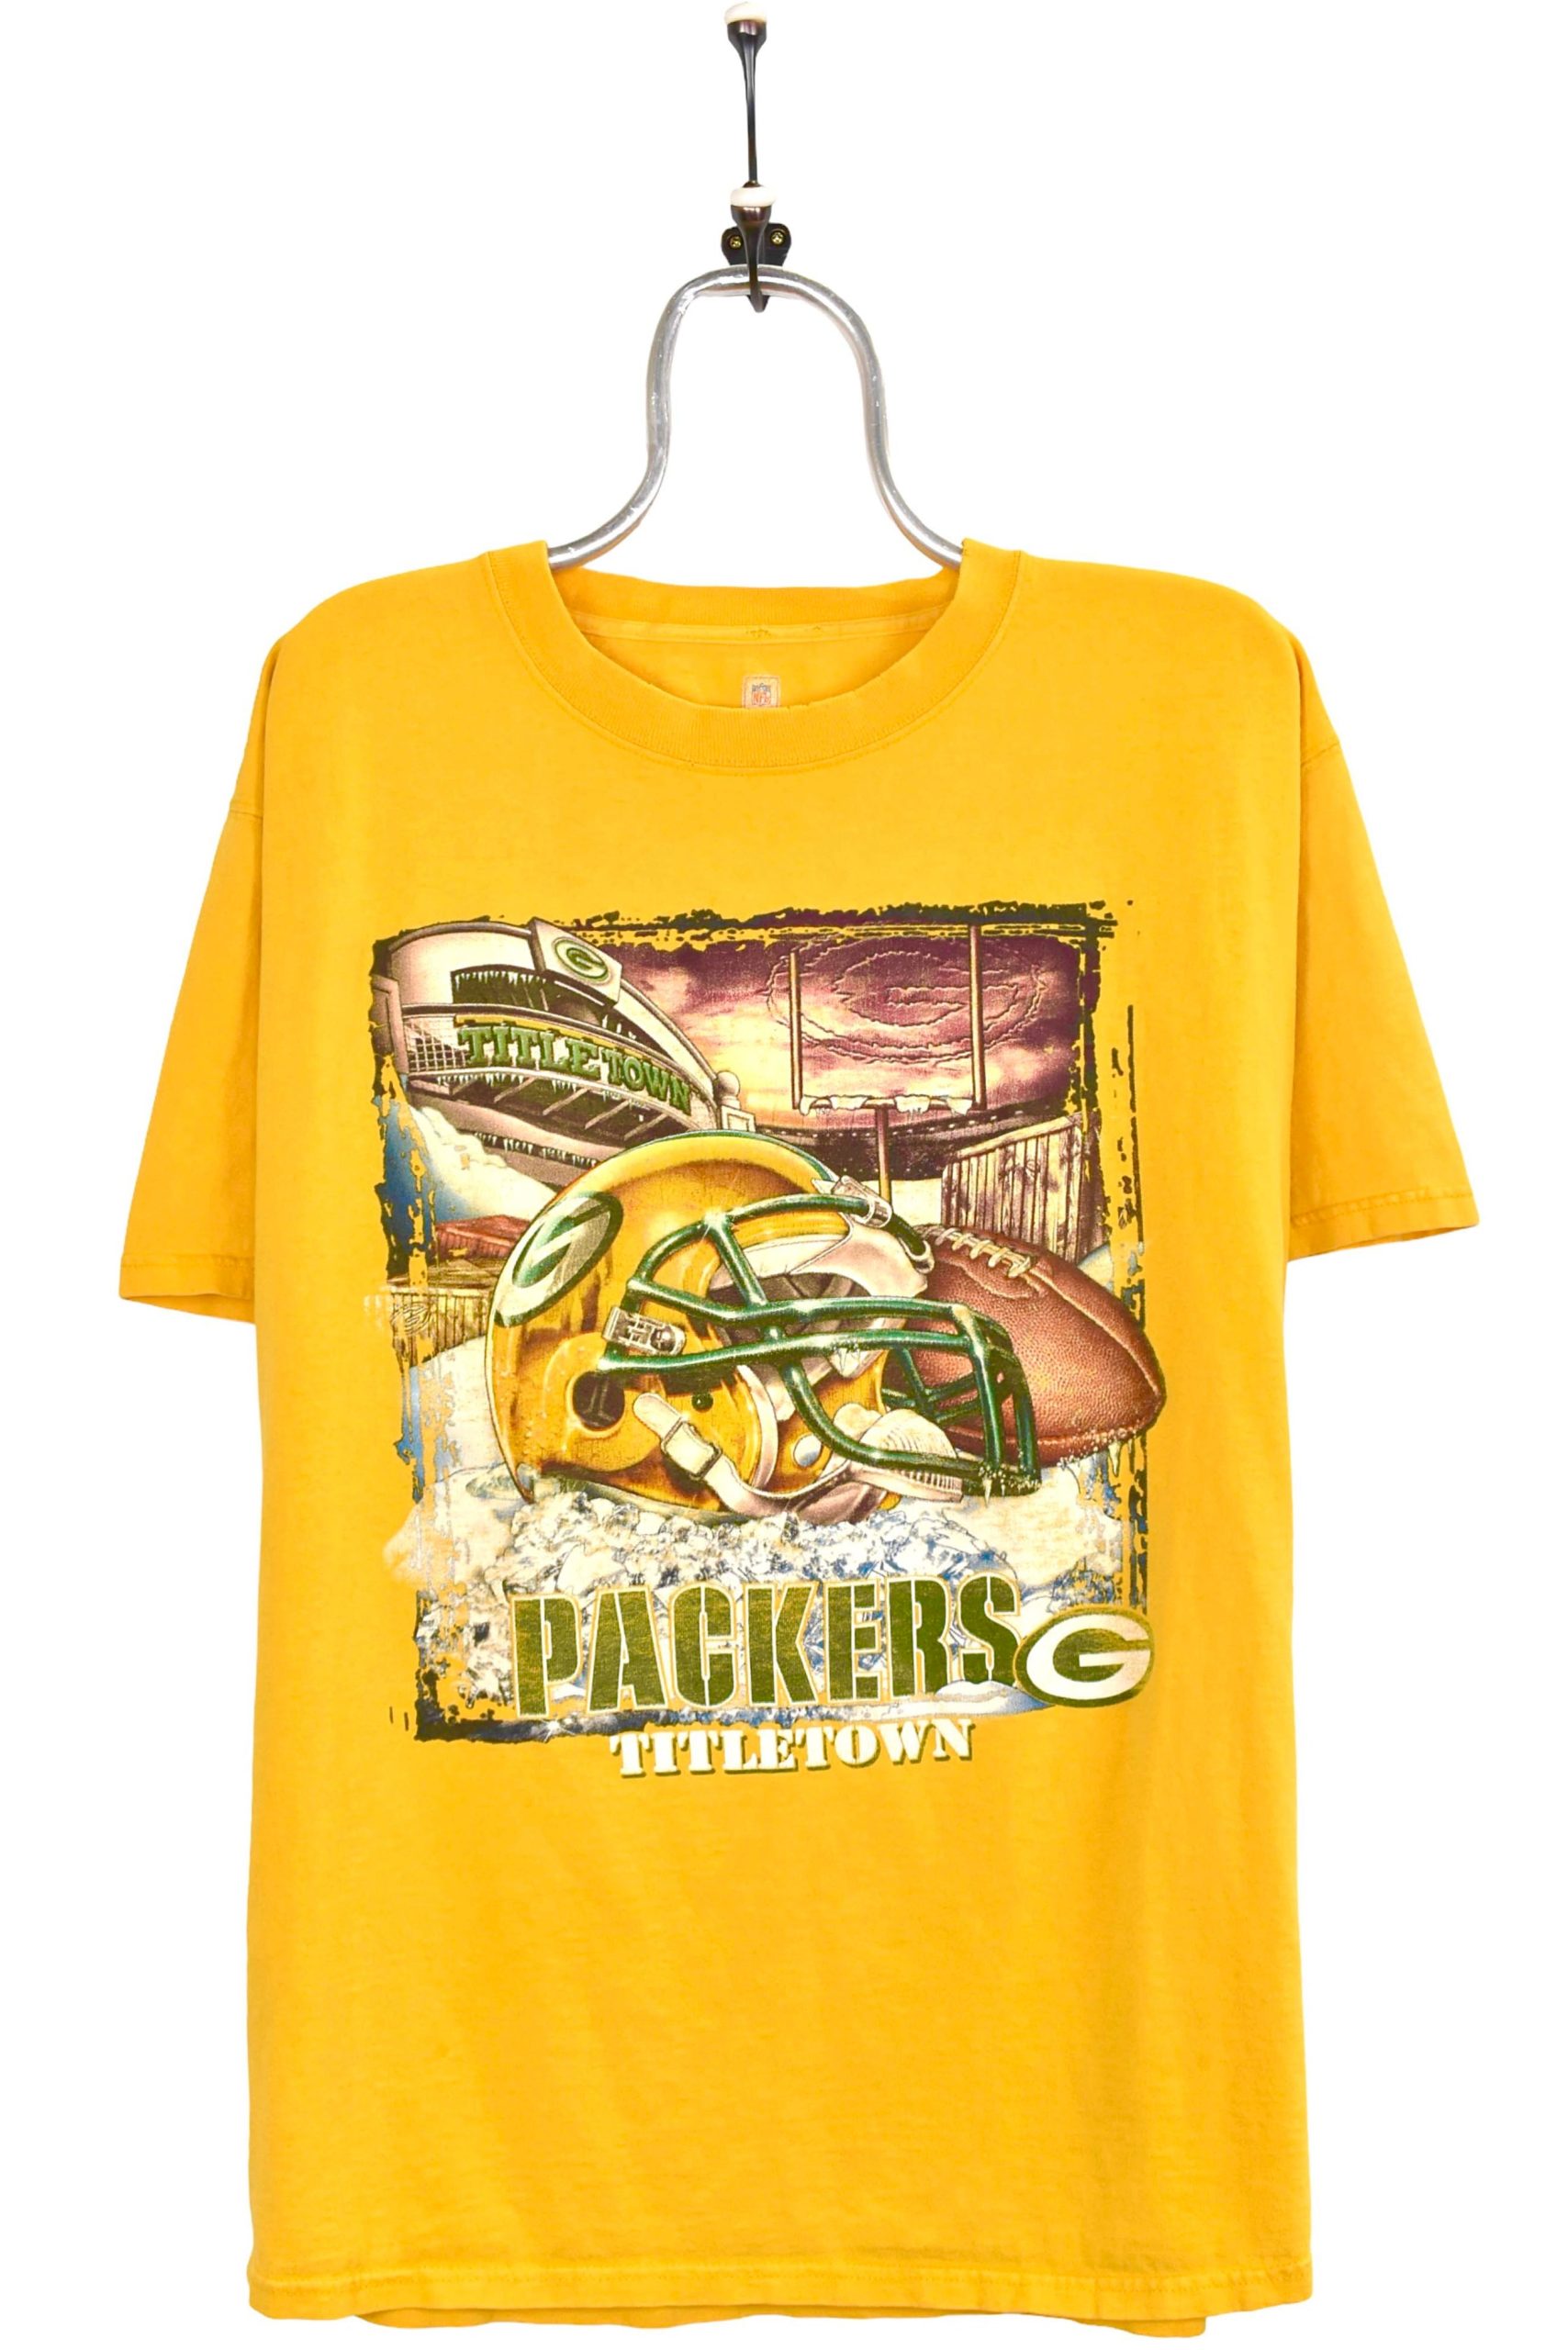 Vintage Green Bay Packers Shirt, Yellow NFL Graphic Tee